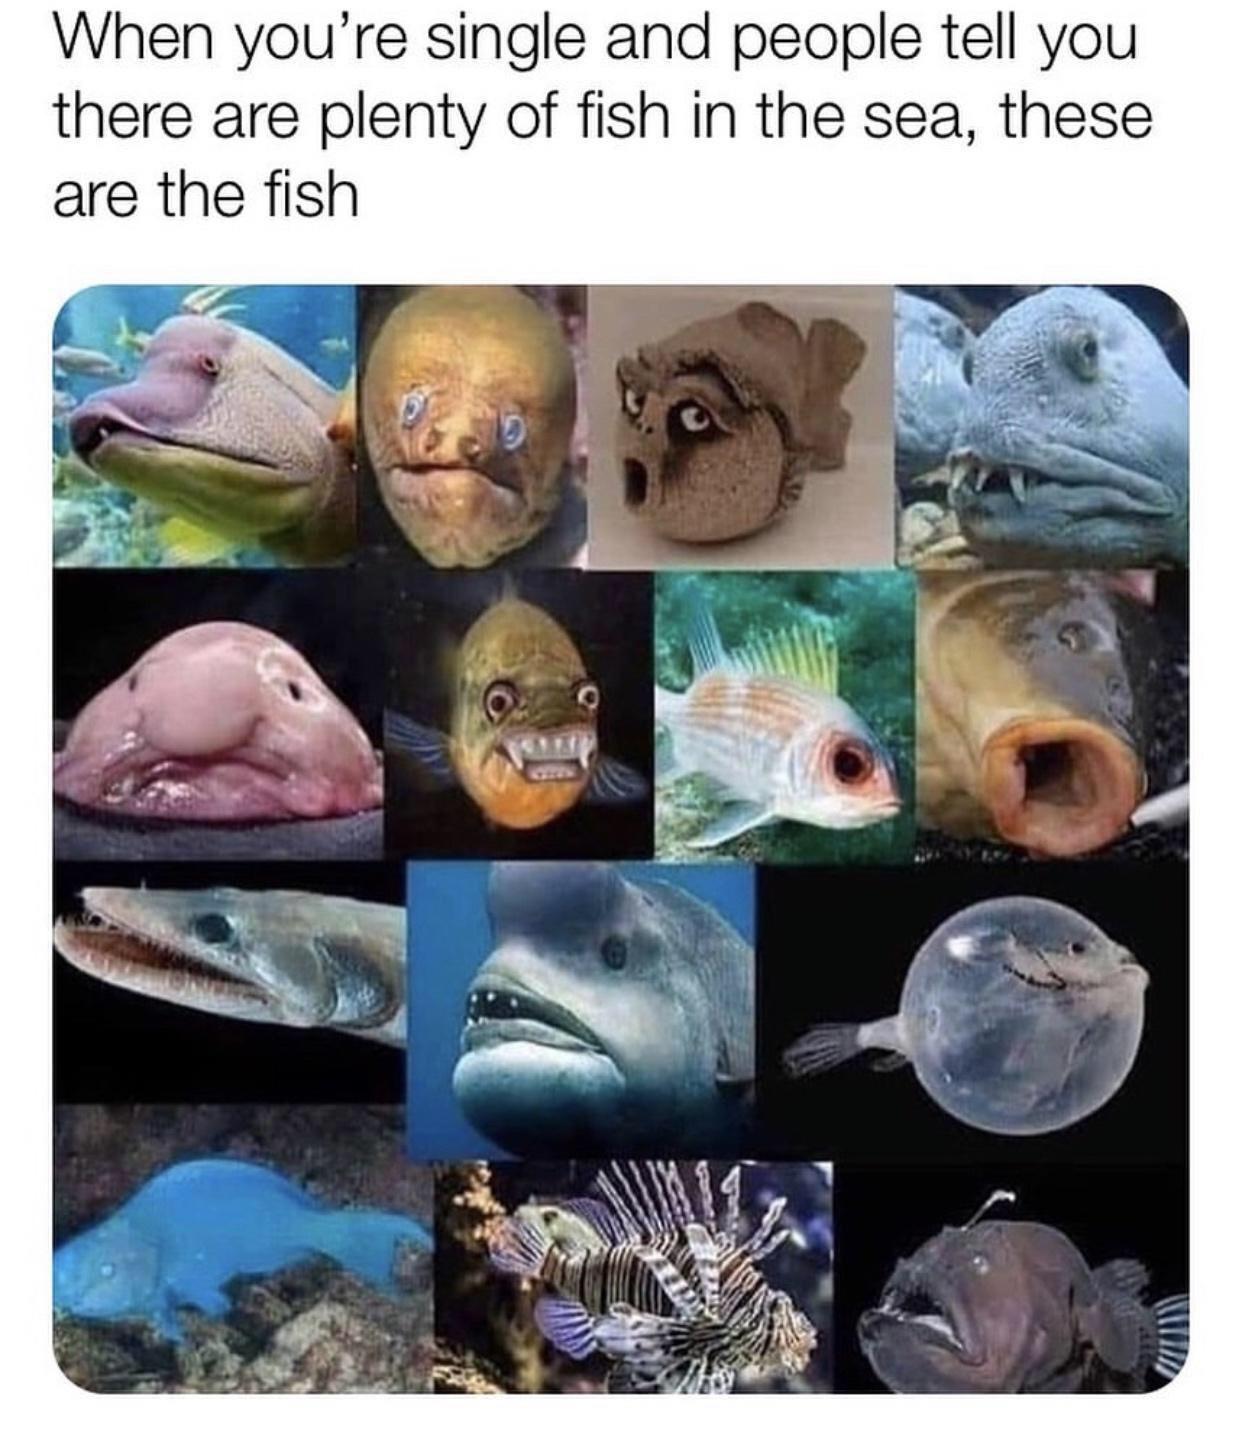 there are plenty of fish in the sea meme - When you're single and people tell you there are plenty of fish in the sea, these are the fish 0